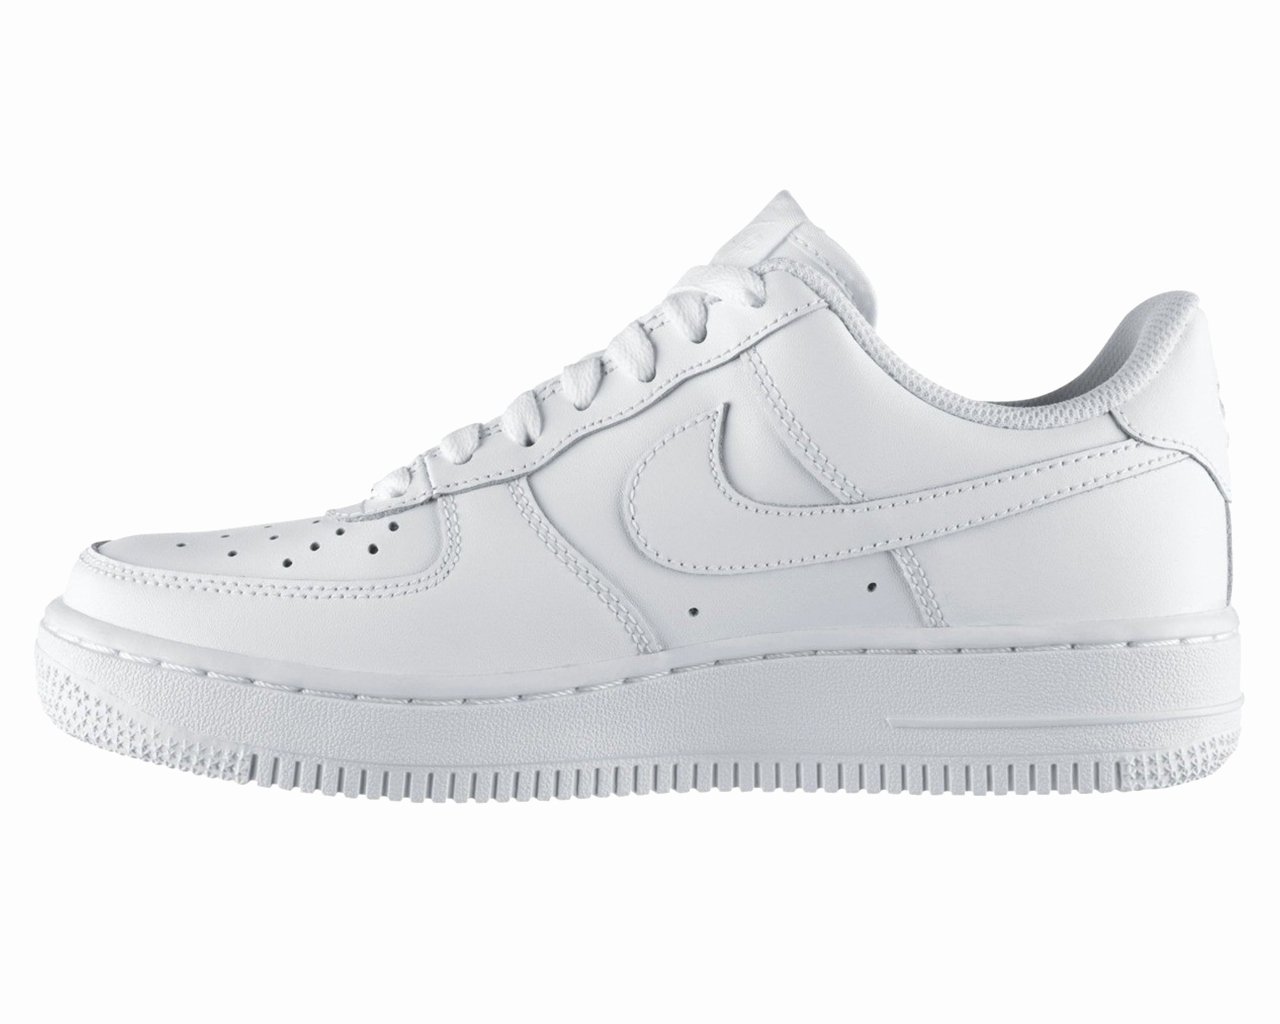 Air force Lost Receipt form New Boys Girls Nike Air force 1 Gs 117 White Leather